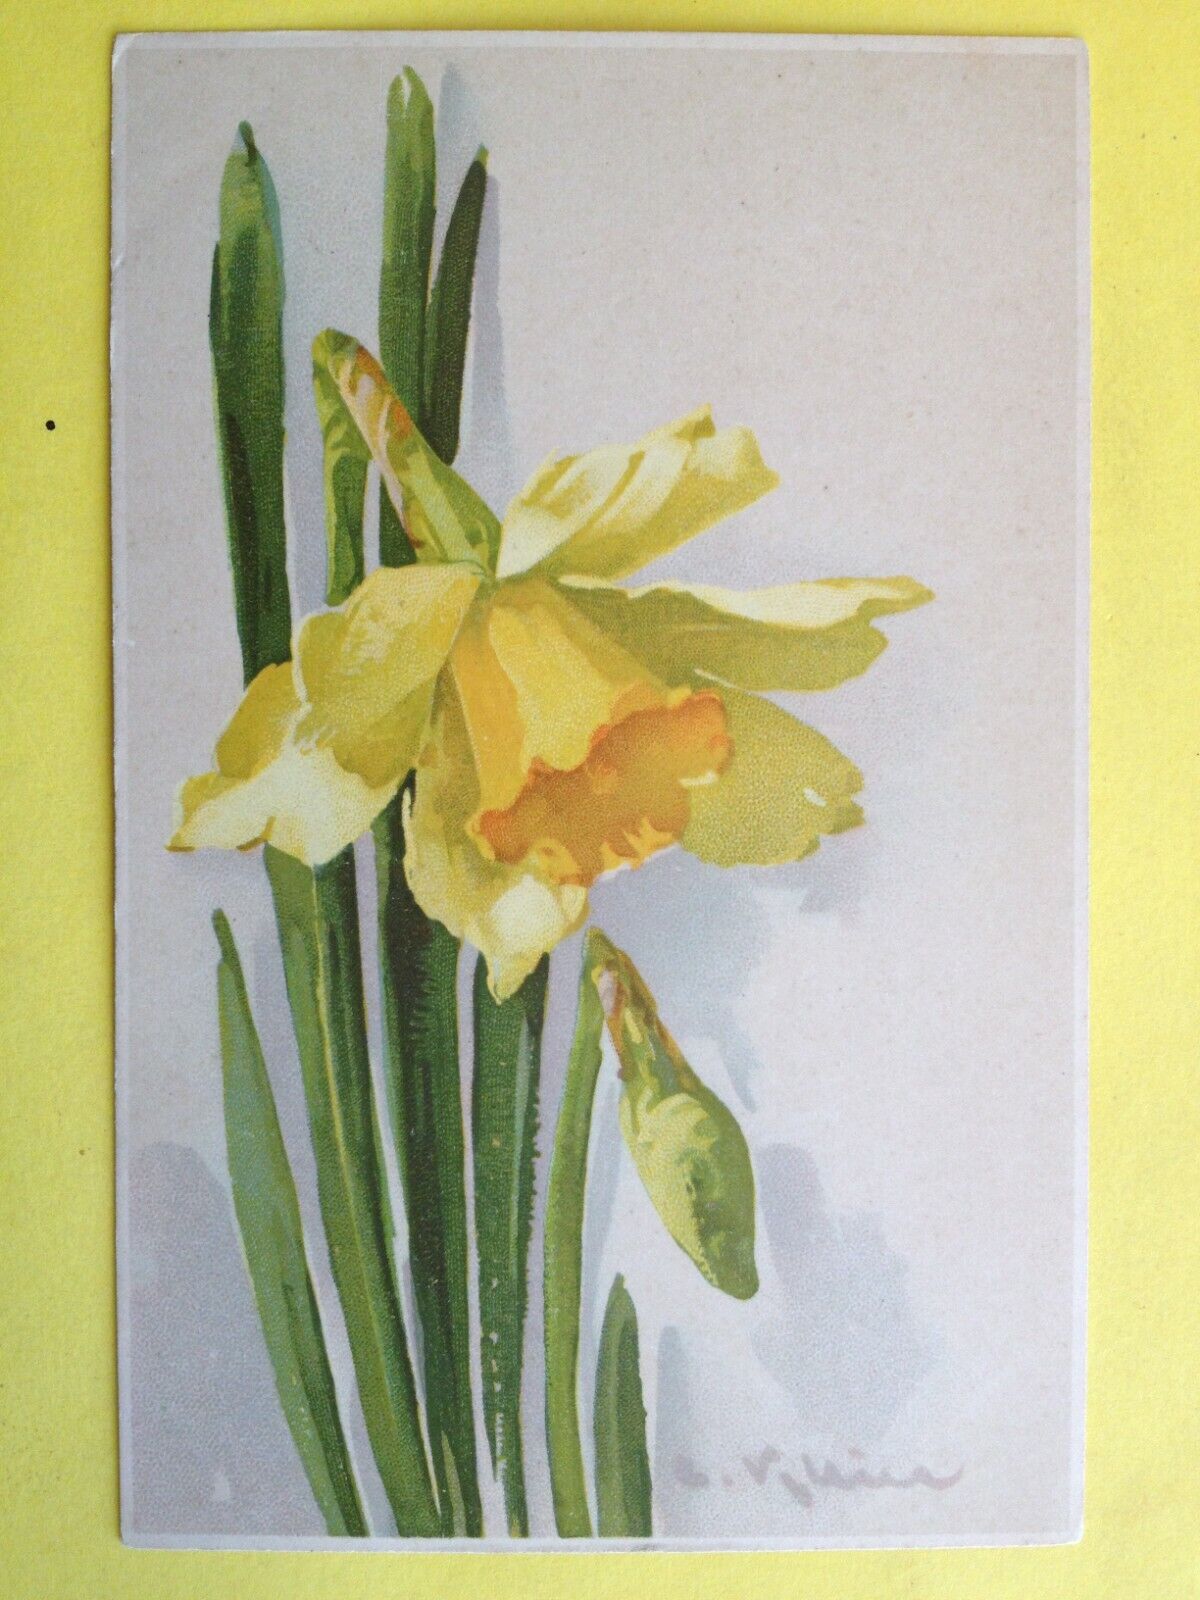 cpa Meissner & book WATERCOLOR DRAWING signed Catharina KLEIN Jonquille Daffodil